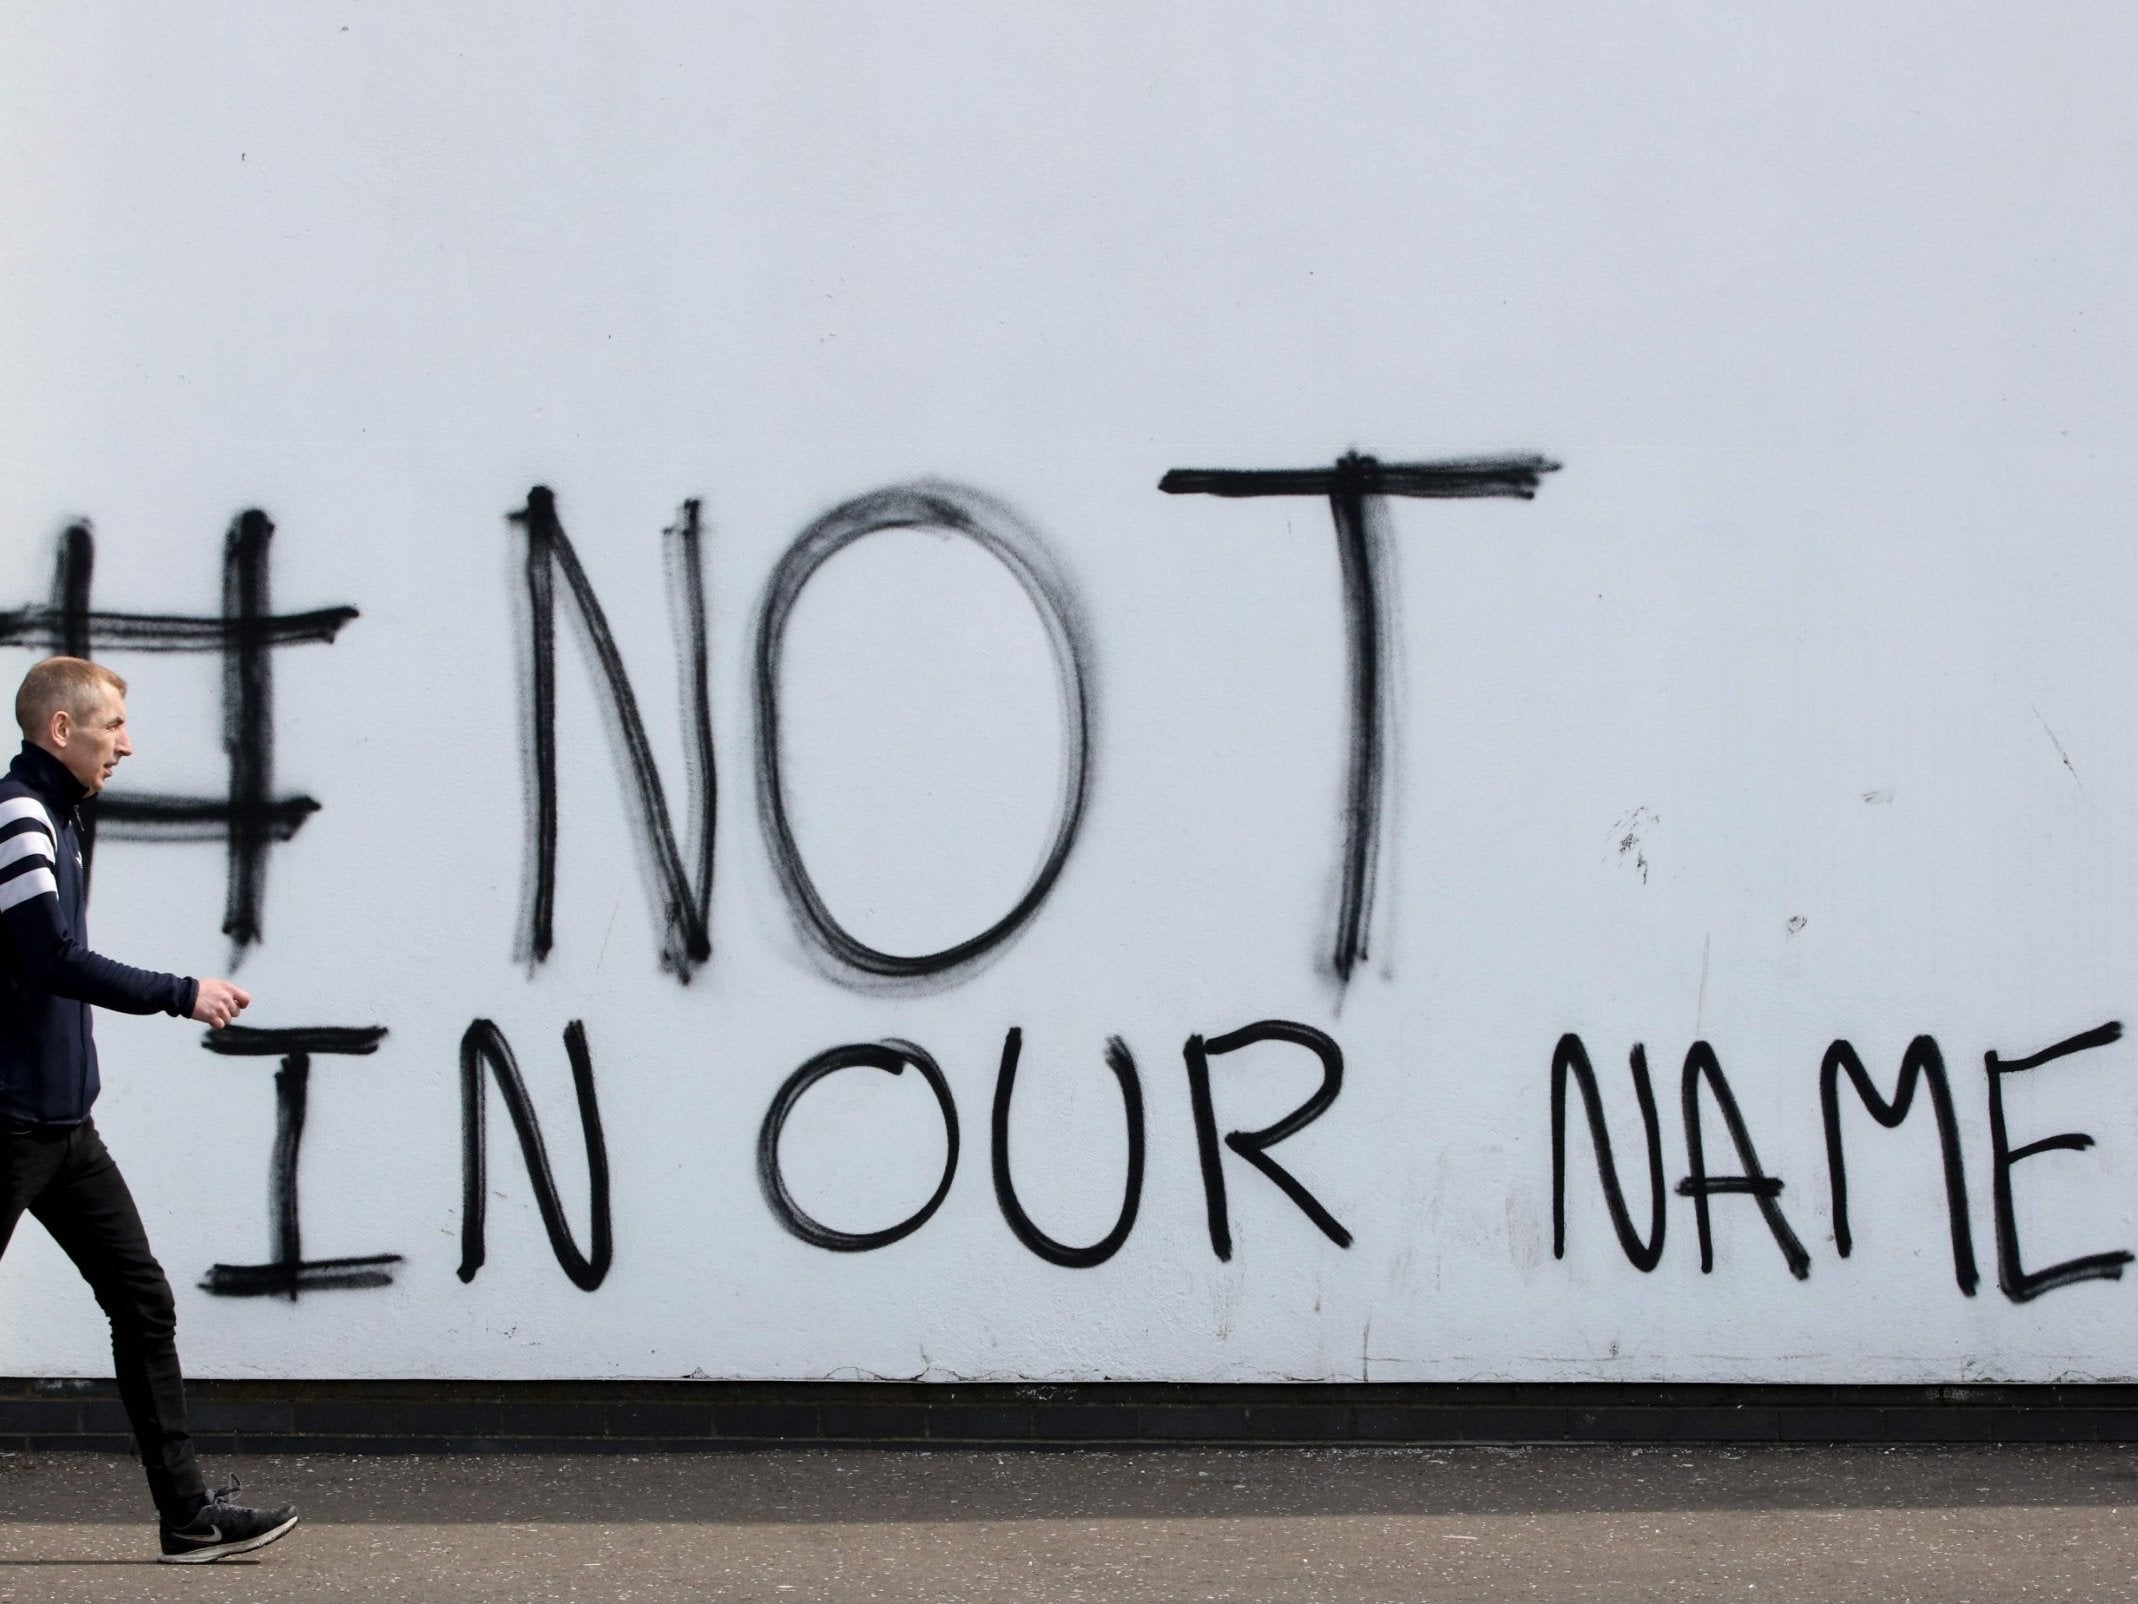 A pedestrian walks past new graffiti that reads "# not in our name" in the Creggan area of Derry in Northern Ireland on 20 April 2019, near to where journalist Lyra McKee was fatally shot.